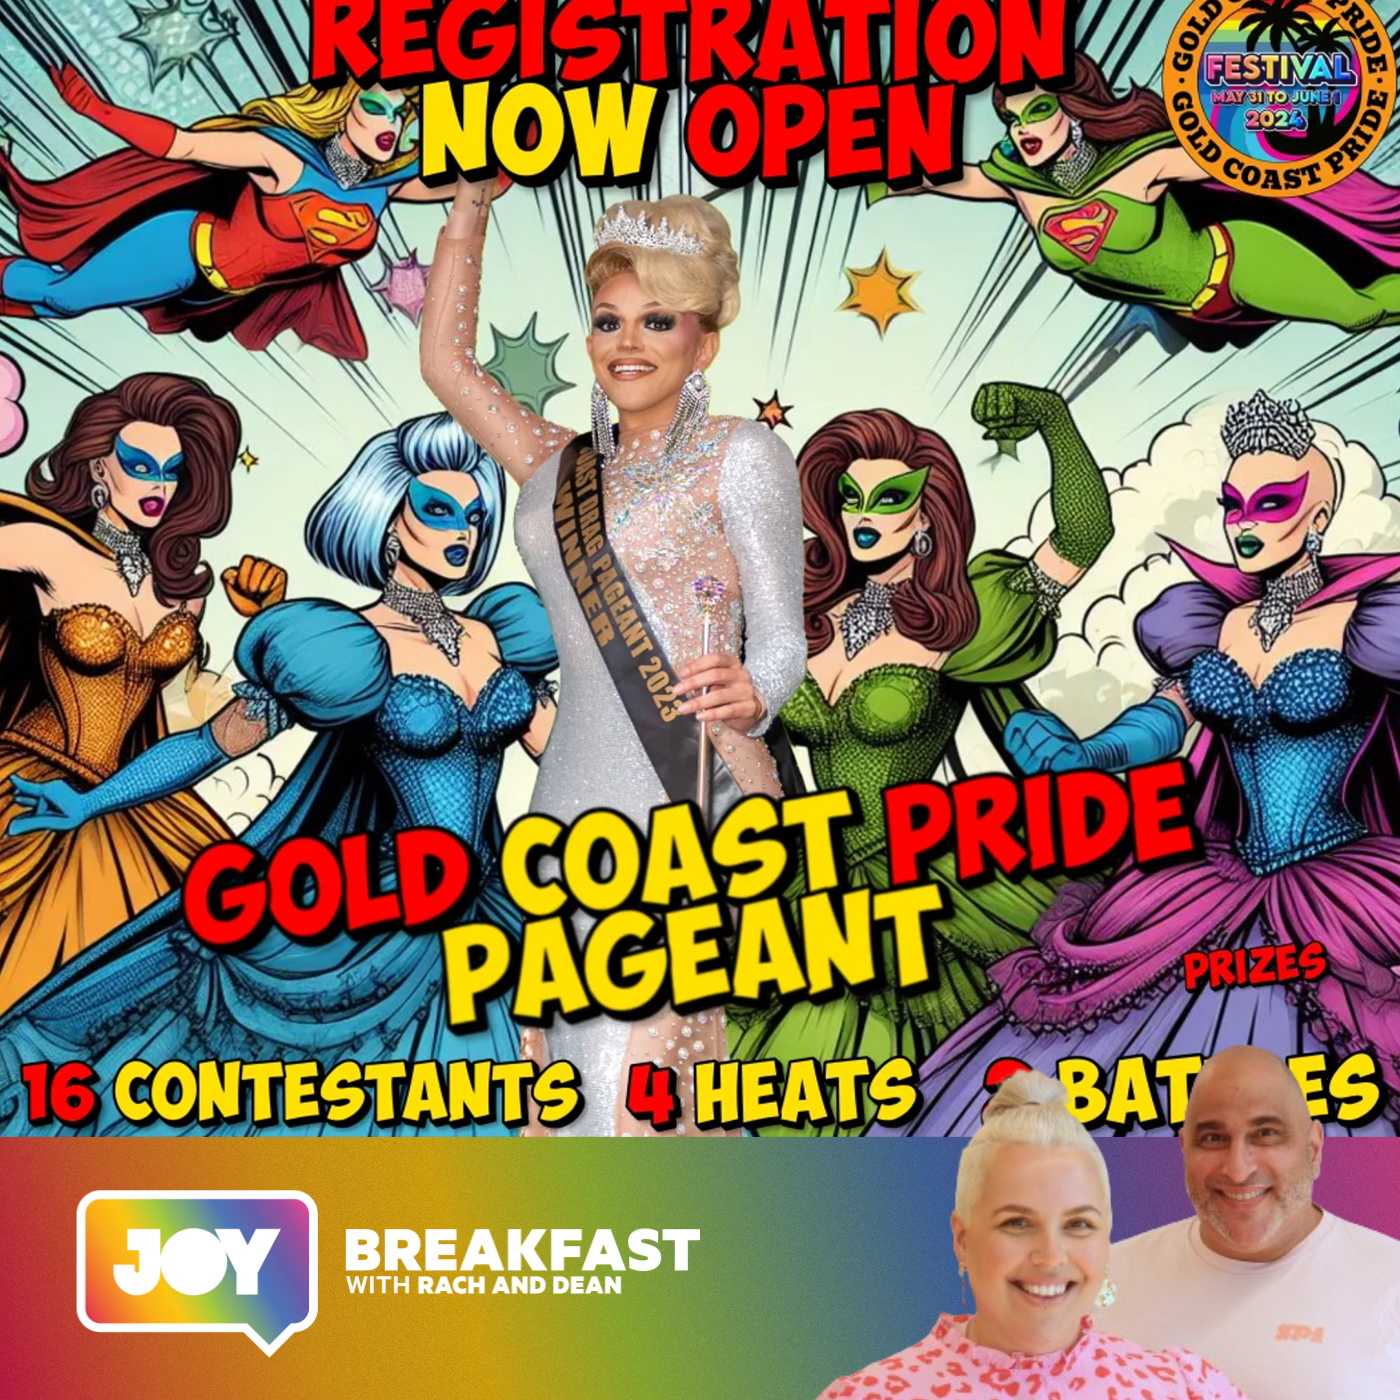 Got what it takes to win Gold Coast Pride’s Drag Pageant?